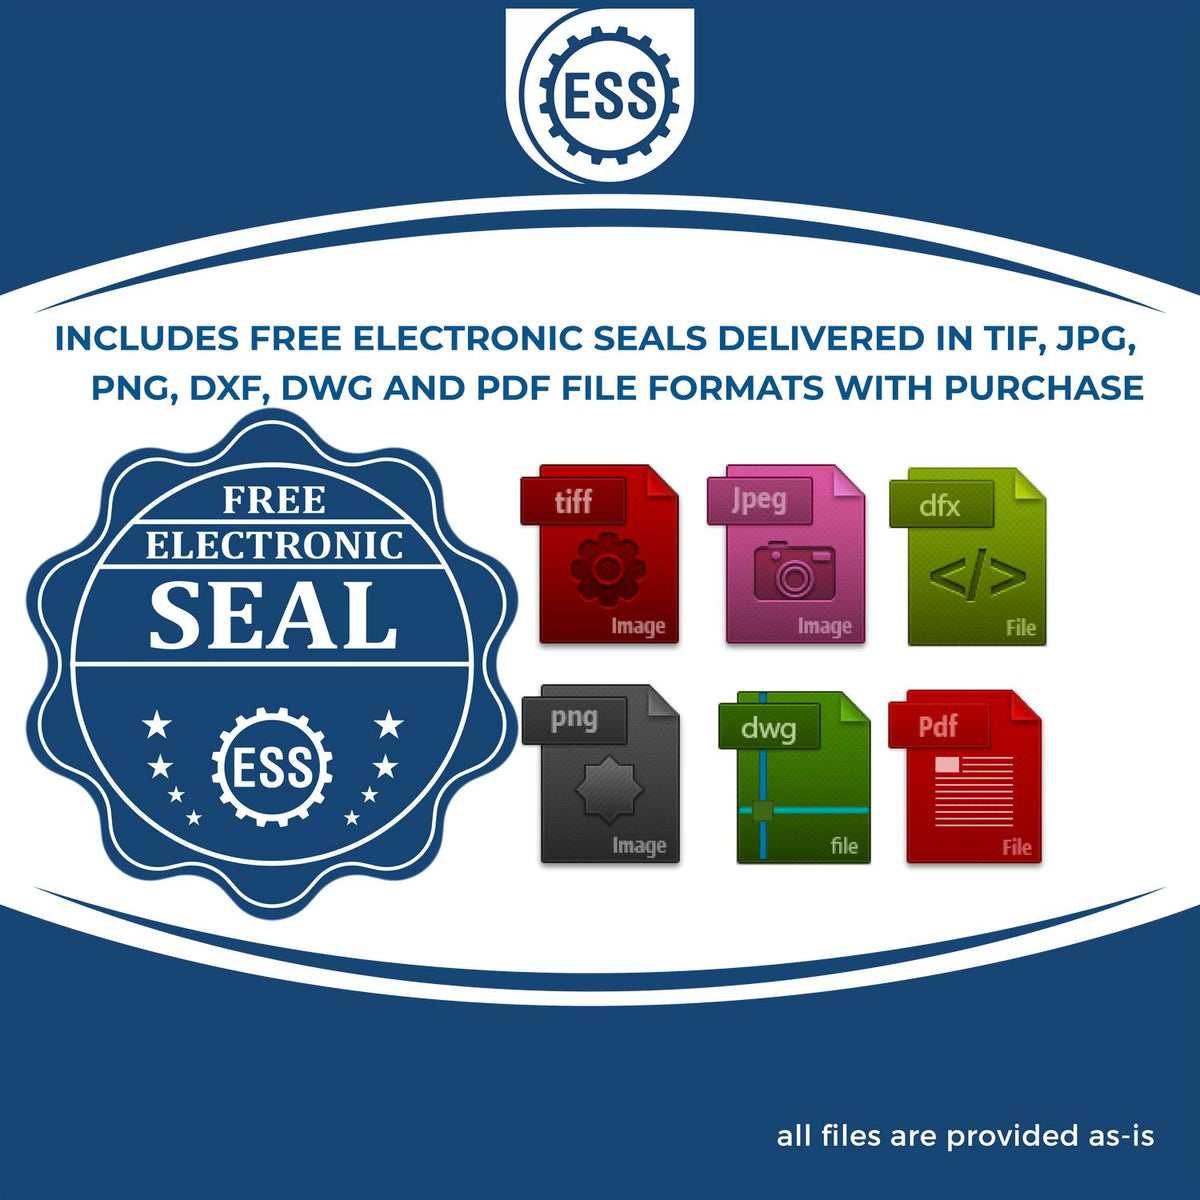 An infographic for the free electronic seal for the Heavy Duty Cast Iron Massachusetts Land Surveyor Seal Embosser illustrating the different file type icons such as DXF, DWG, TIF, JPG and PNG.